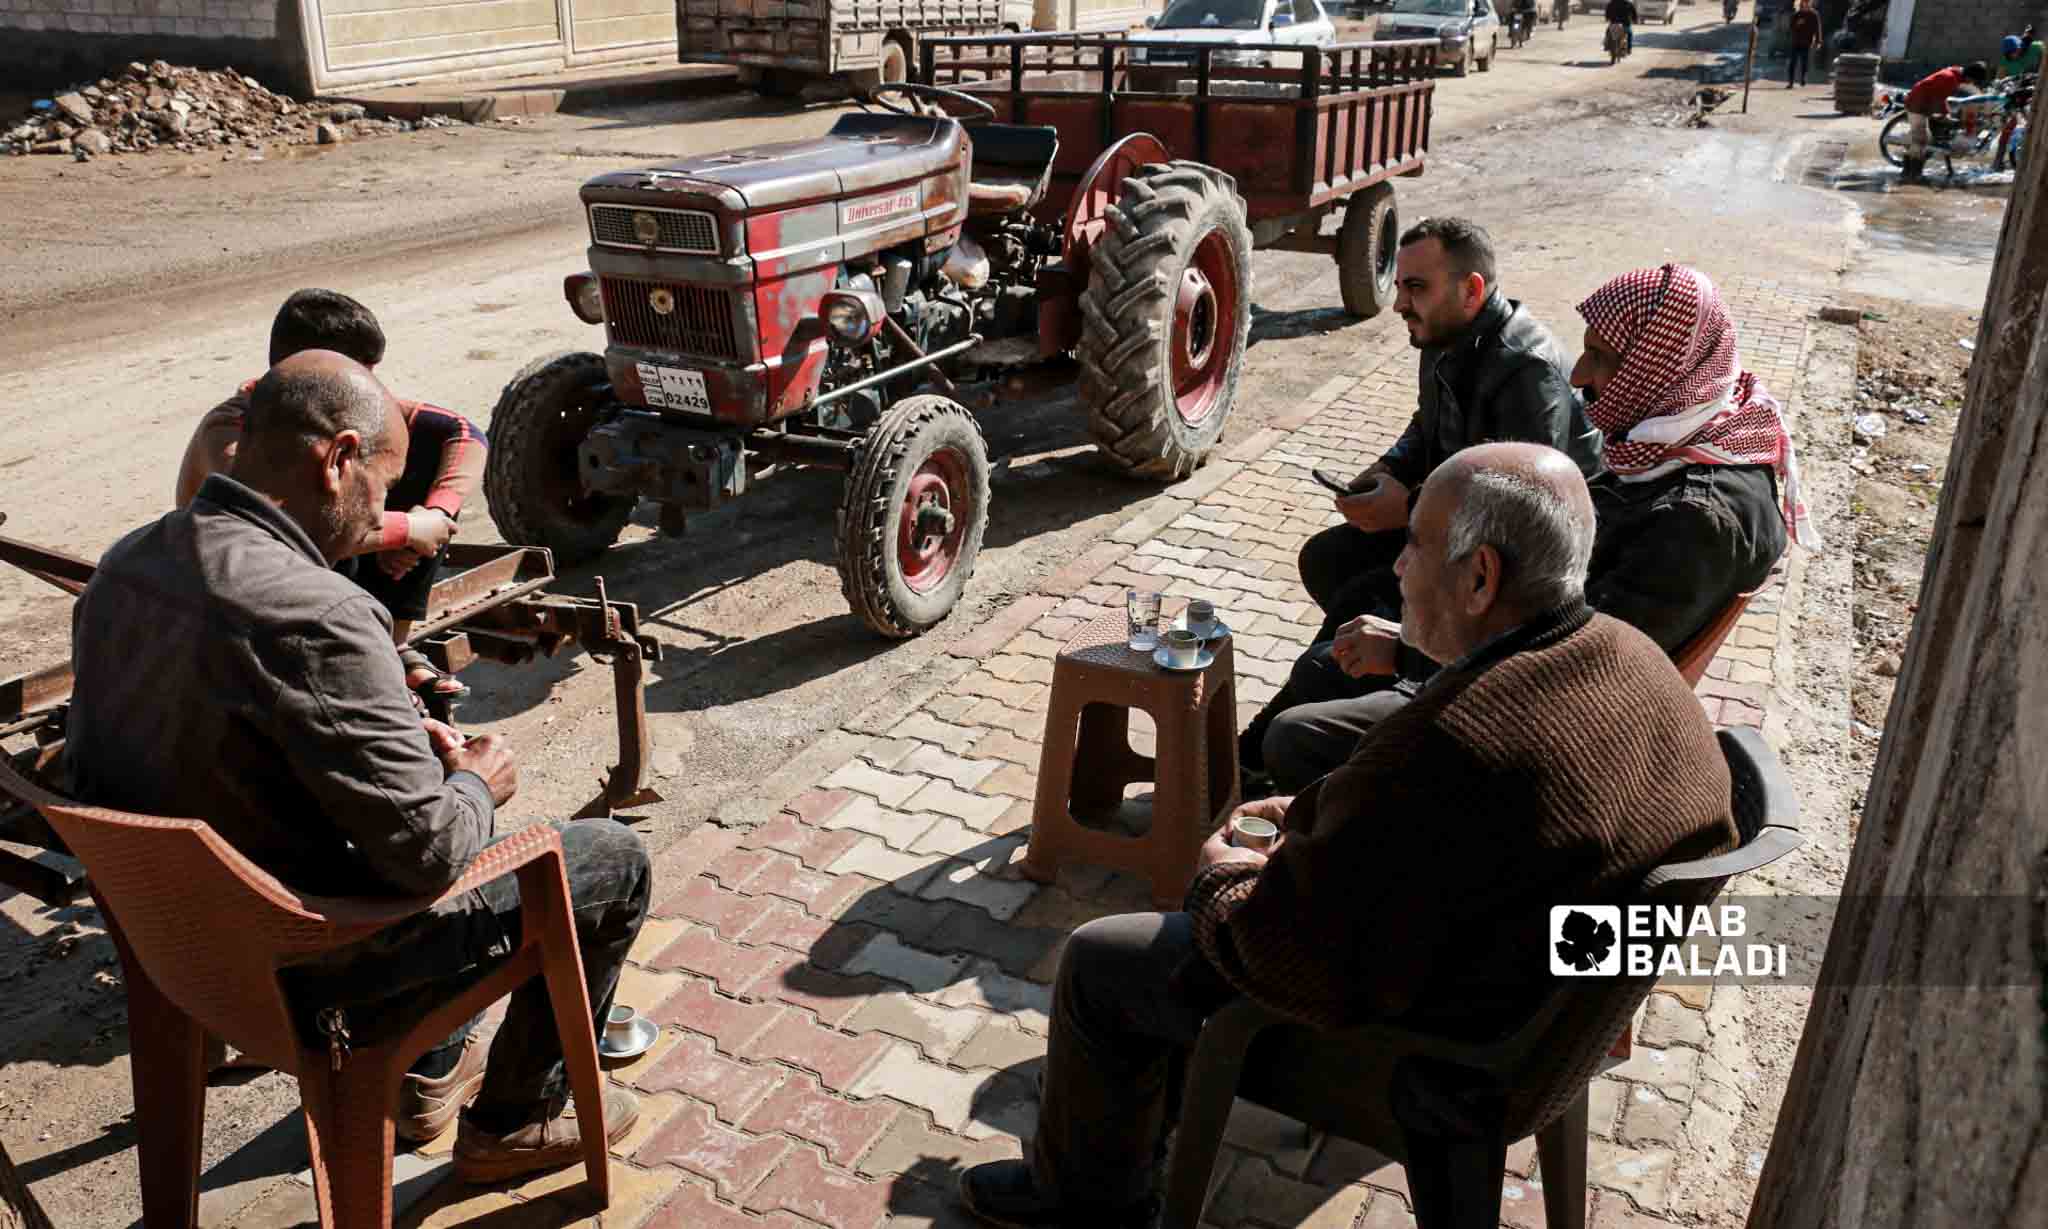 Syrian men sit in a street in Jindires city a year after the earthquake disaster that affected southern Turkey and northwestern Syria - February 6, 2024 (Enab Baladi/Dayan Junpaz)
